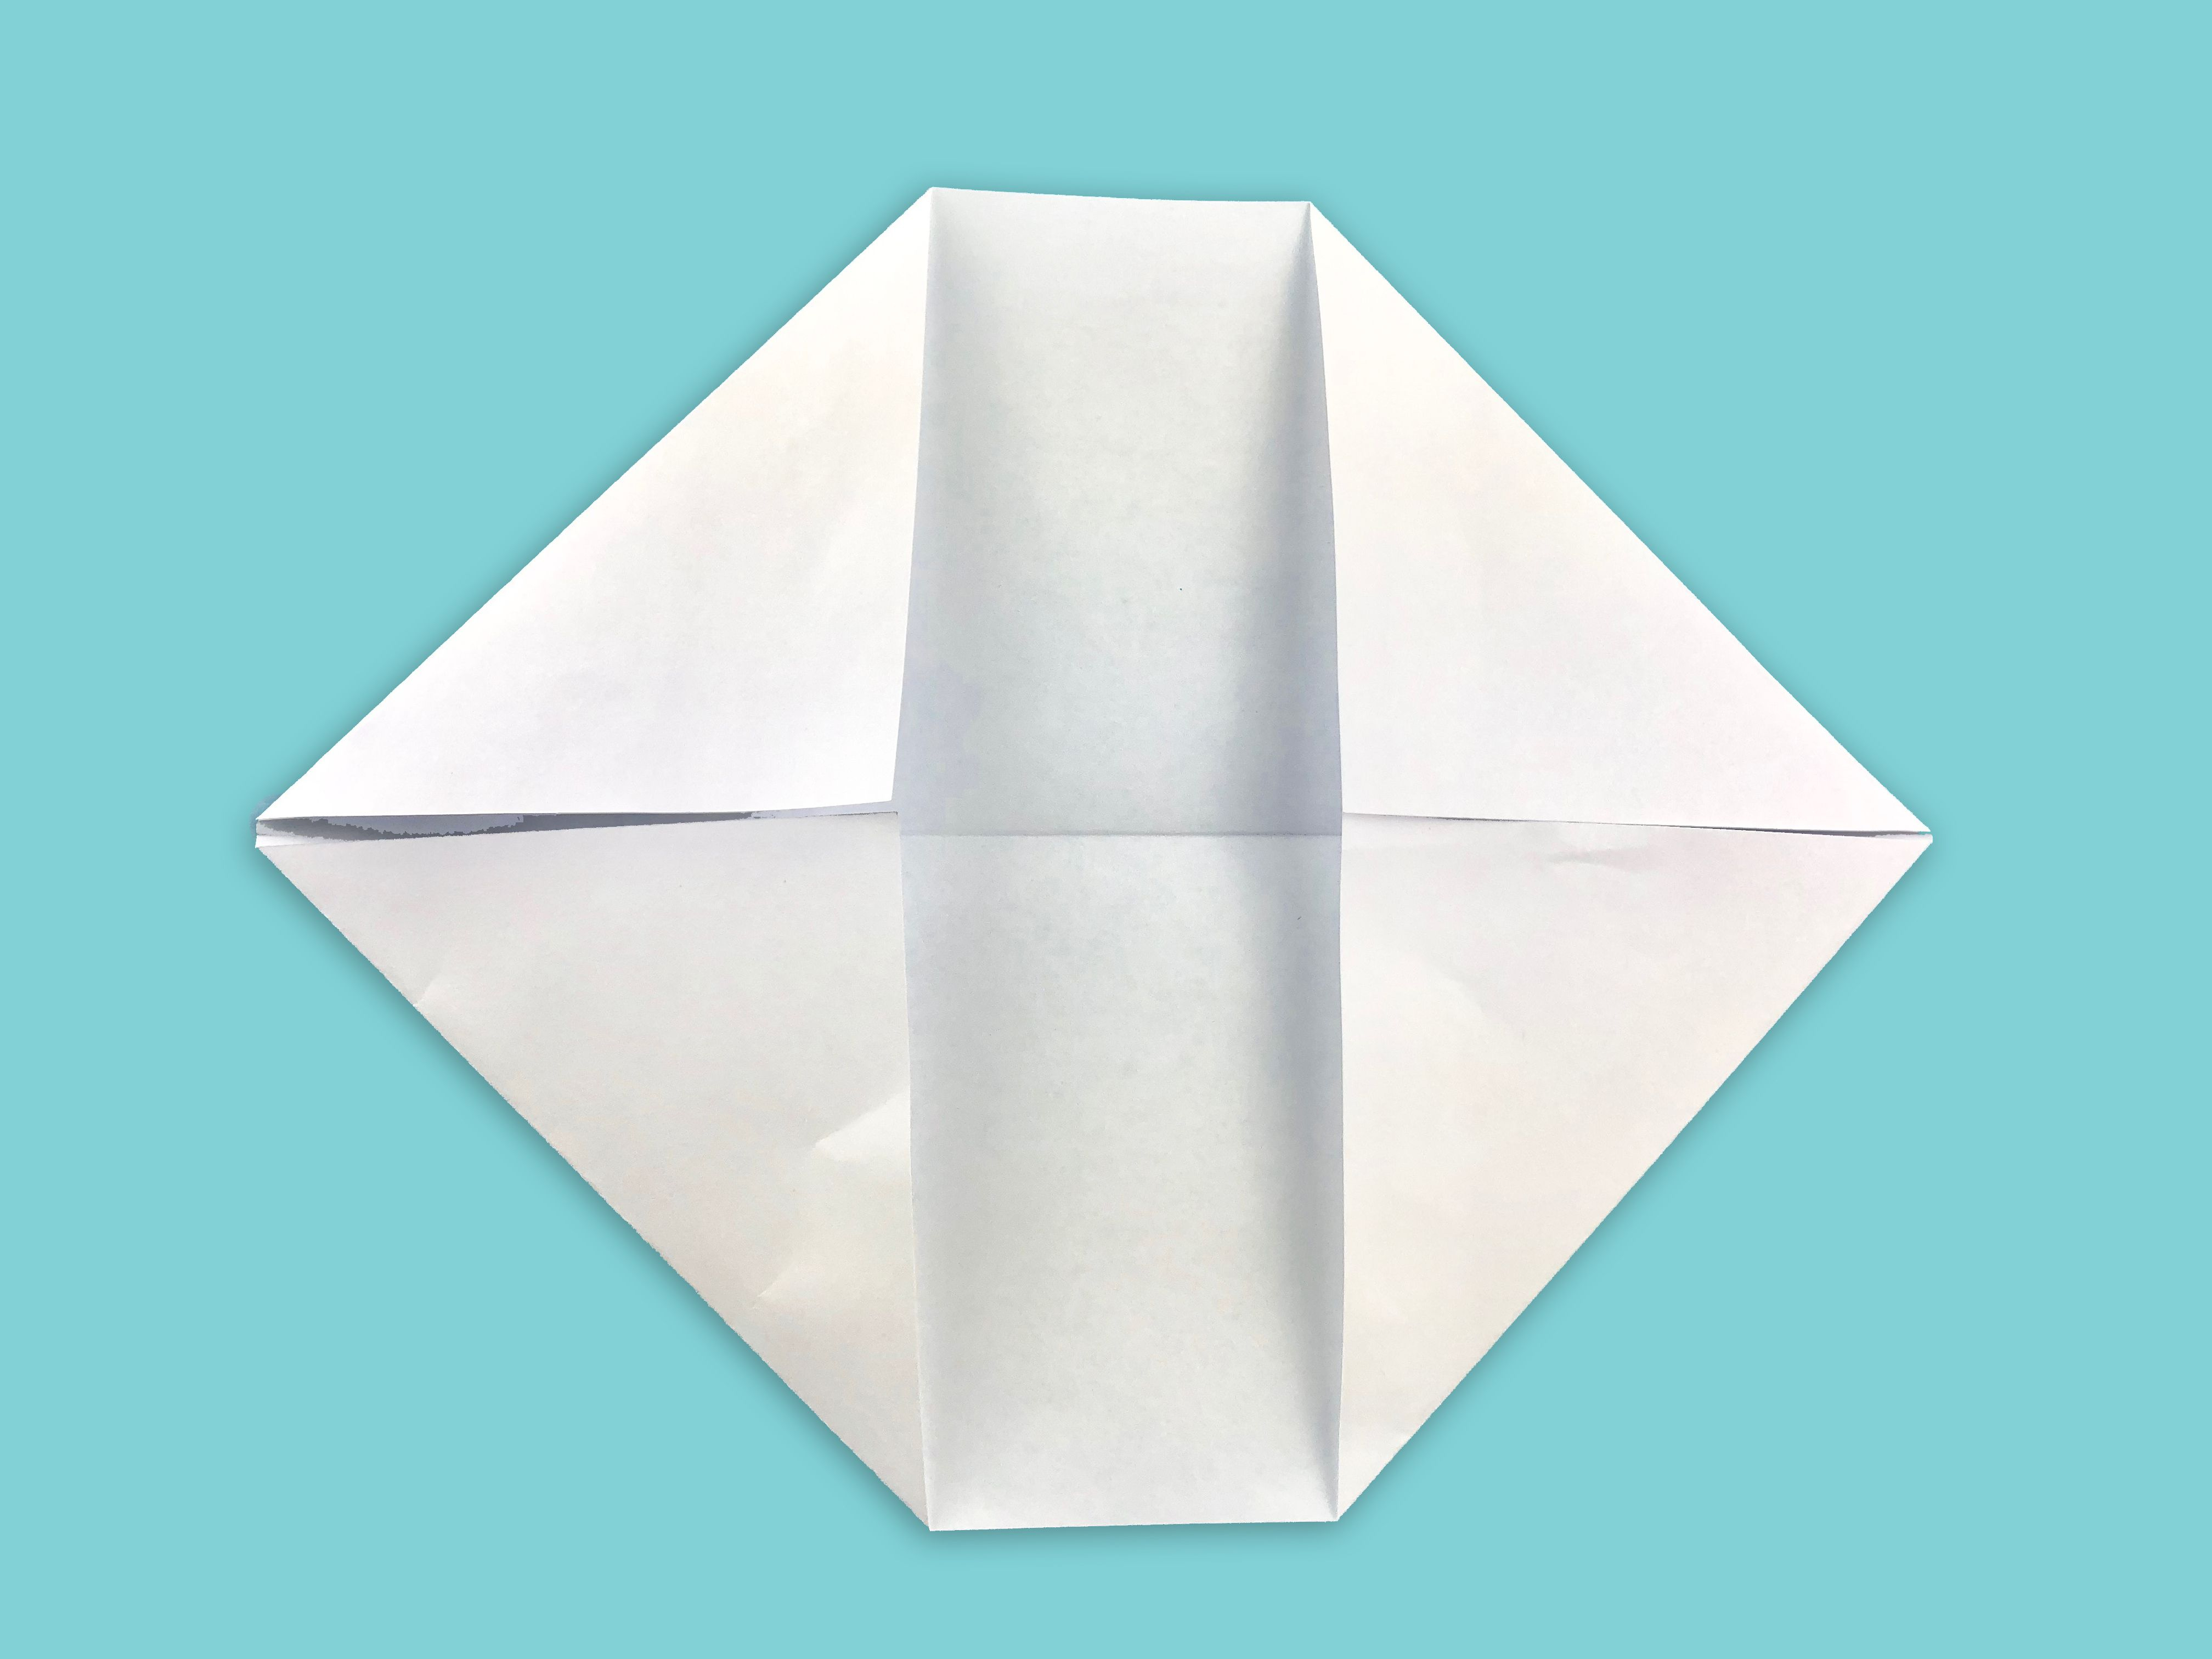 Index Card Origami How To Fold A Clever Pull Tab Note With Paper